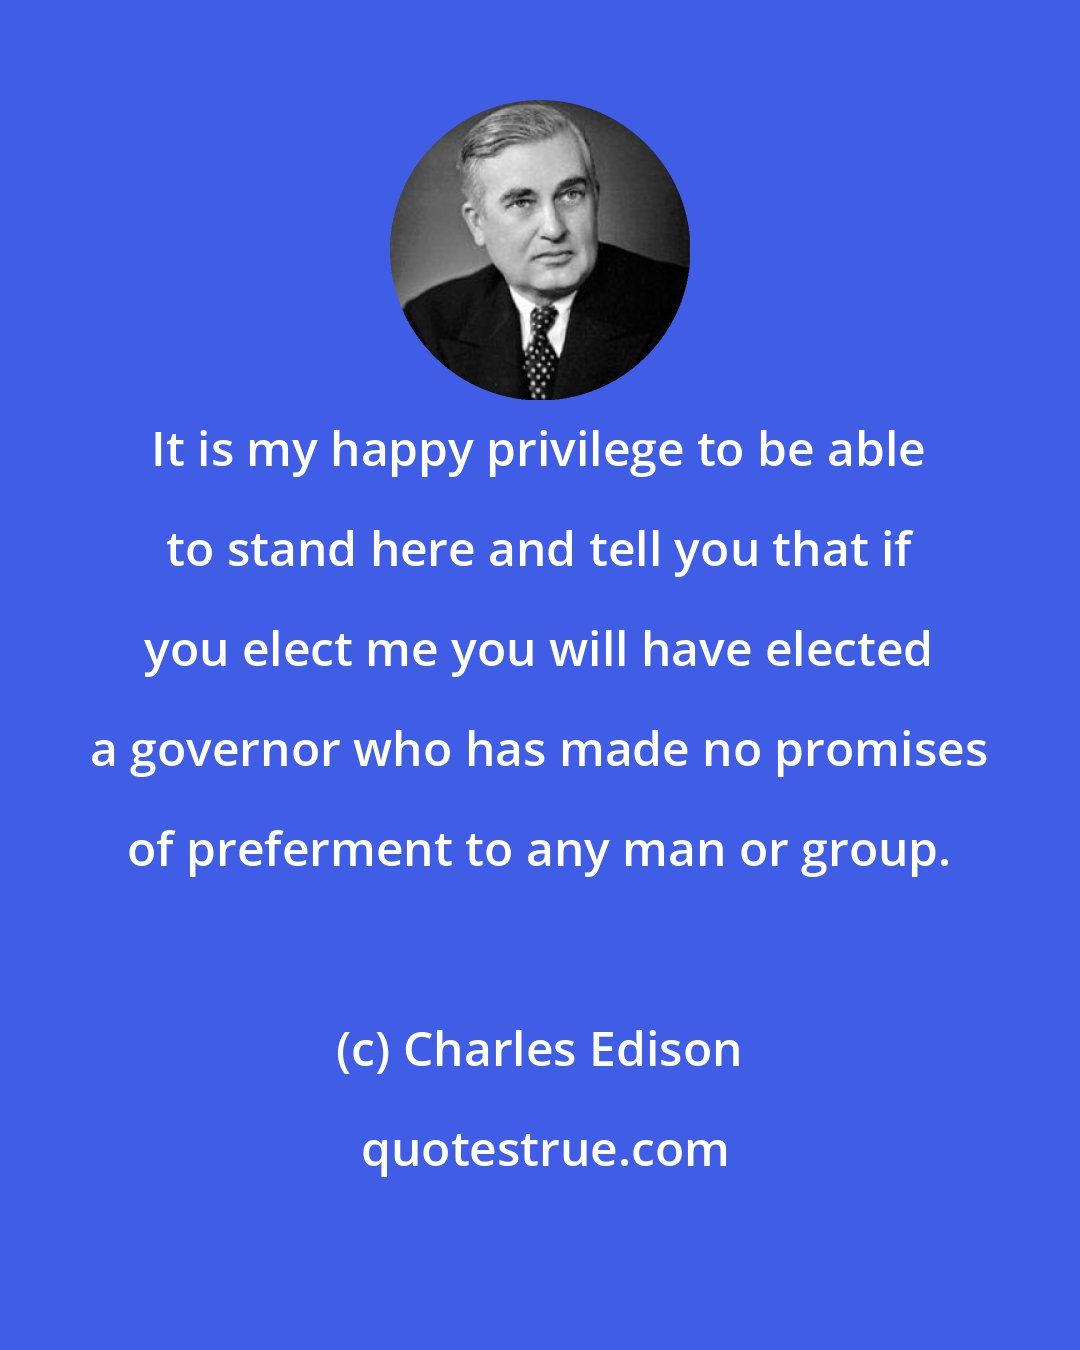 Charles Edison: It is my happy privilege to be able to stand here and tell you that if you elect me you will have elected a governor who has made no promises of preferment to any man or group.